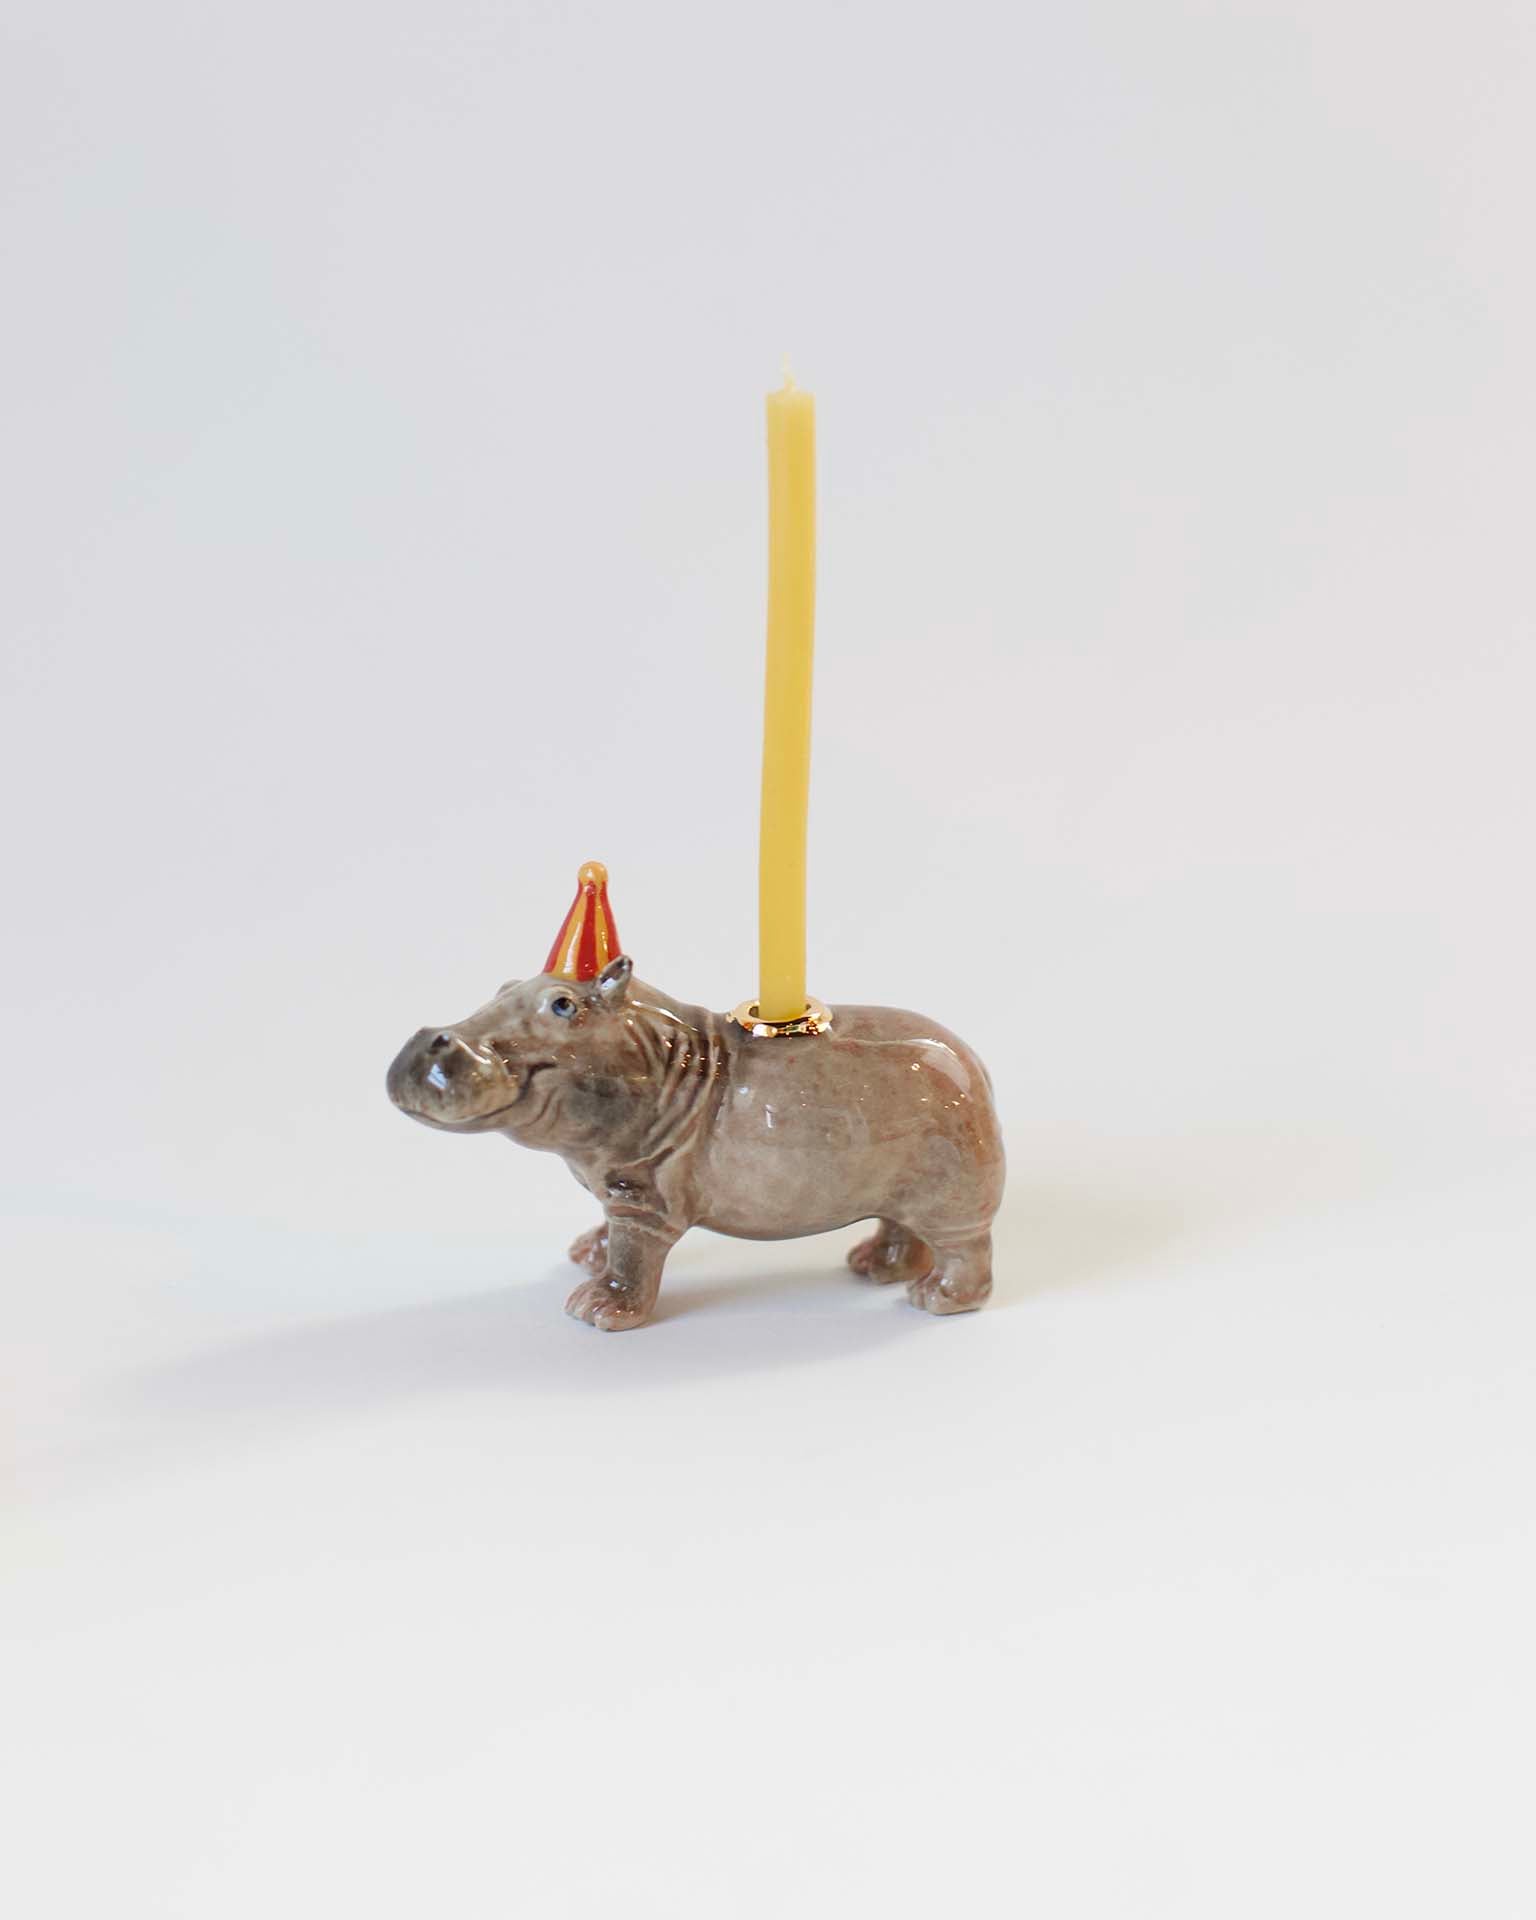 Little camp hollow paper + party hippo cake topper in box